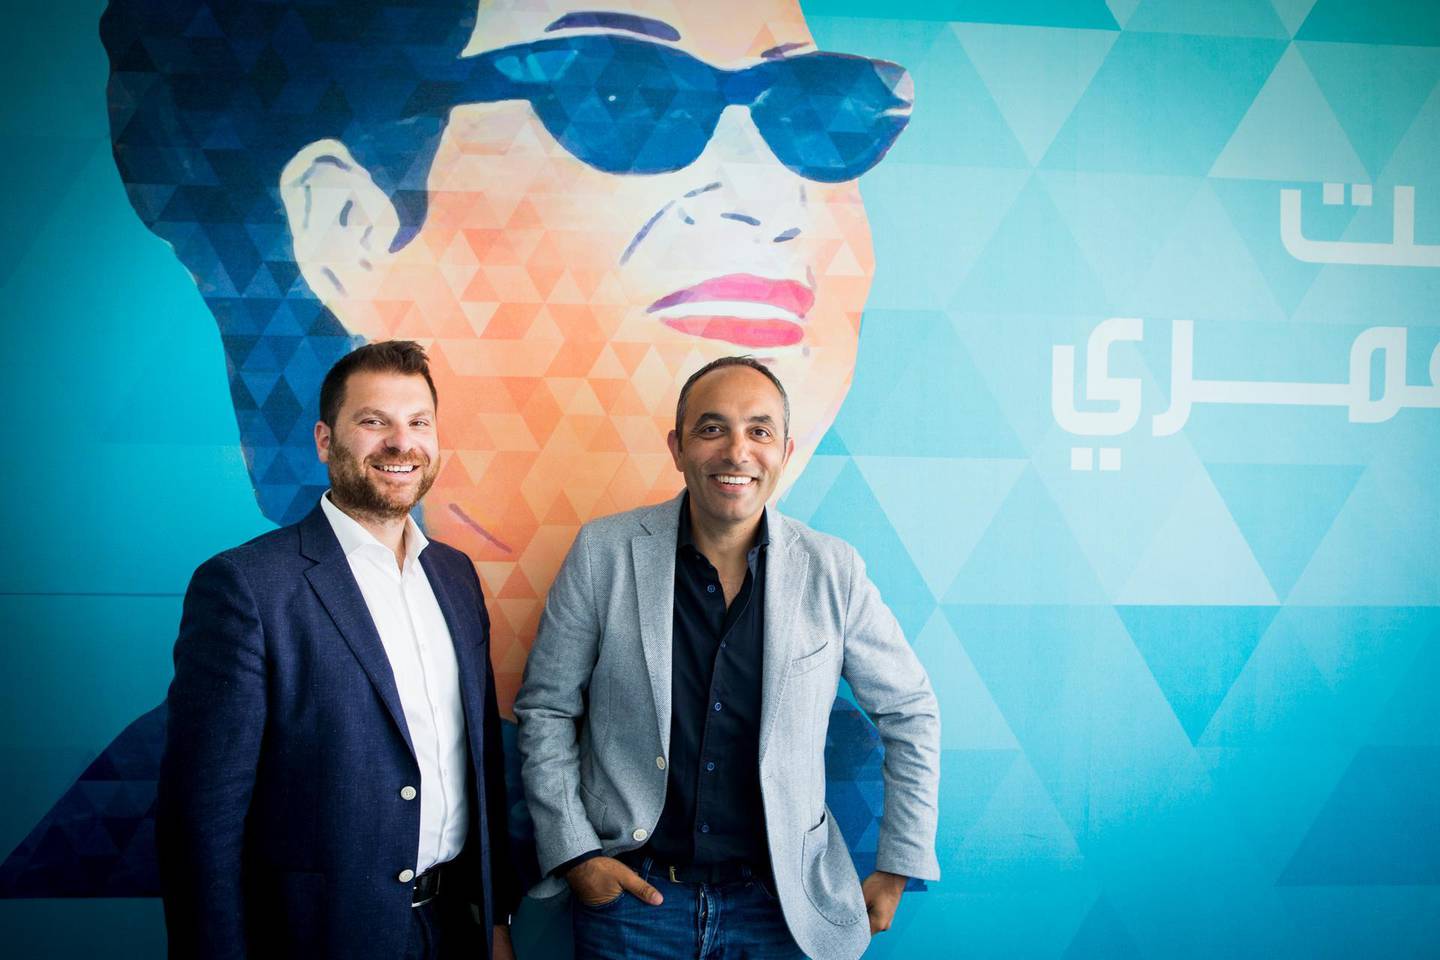 10 JULY 2017- BEIRUT, LEBANON(L-R) Eddy Maroun and Elie Habib, co-creators of Anghami, at Anghami Headquarter offices. Anghami is the first legal music streaming platform and digital distribution company in the Arab World region launched in November 2012 providing unlimited Arabic and International music to stream and download for offline mode.Photo by Natalie Naccache for The National